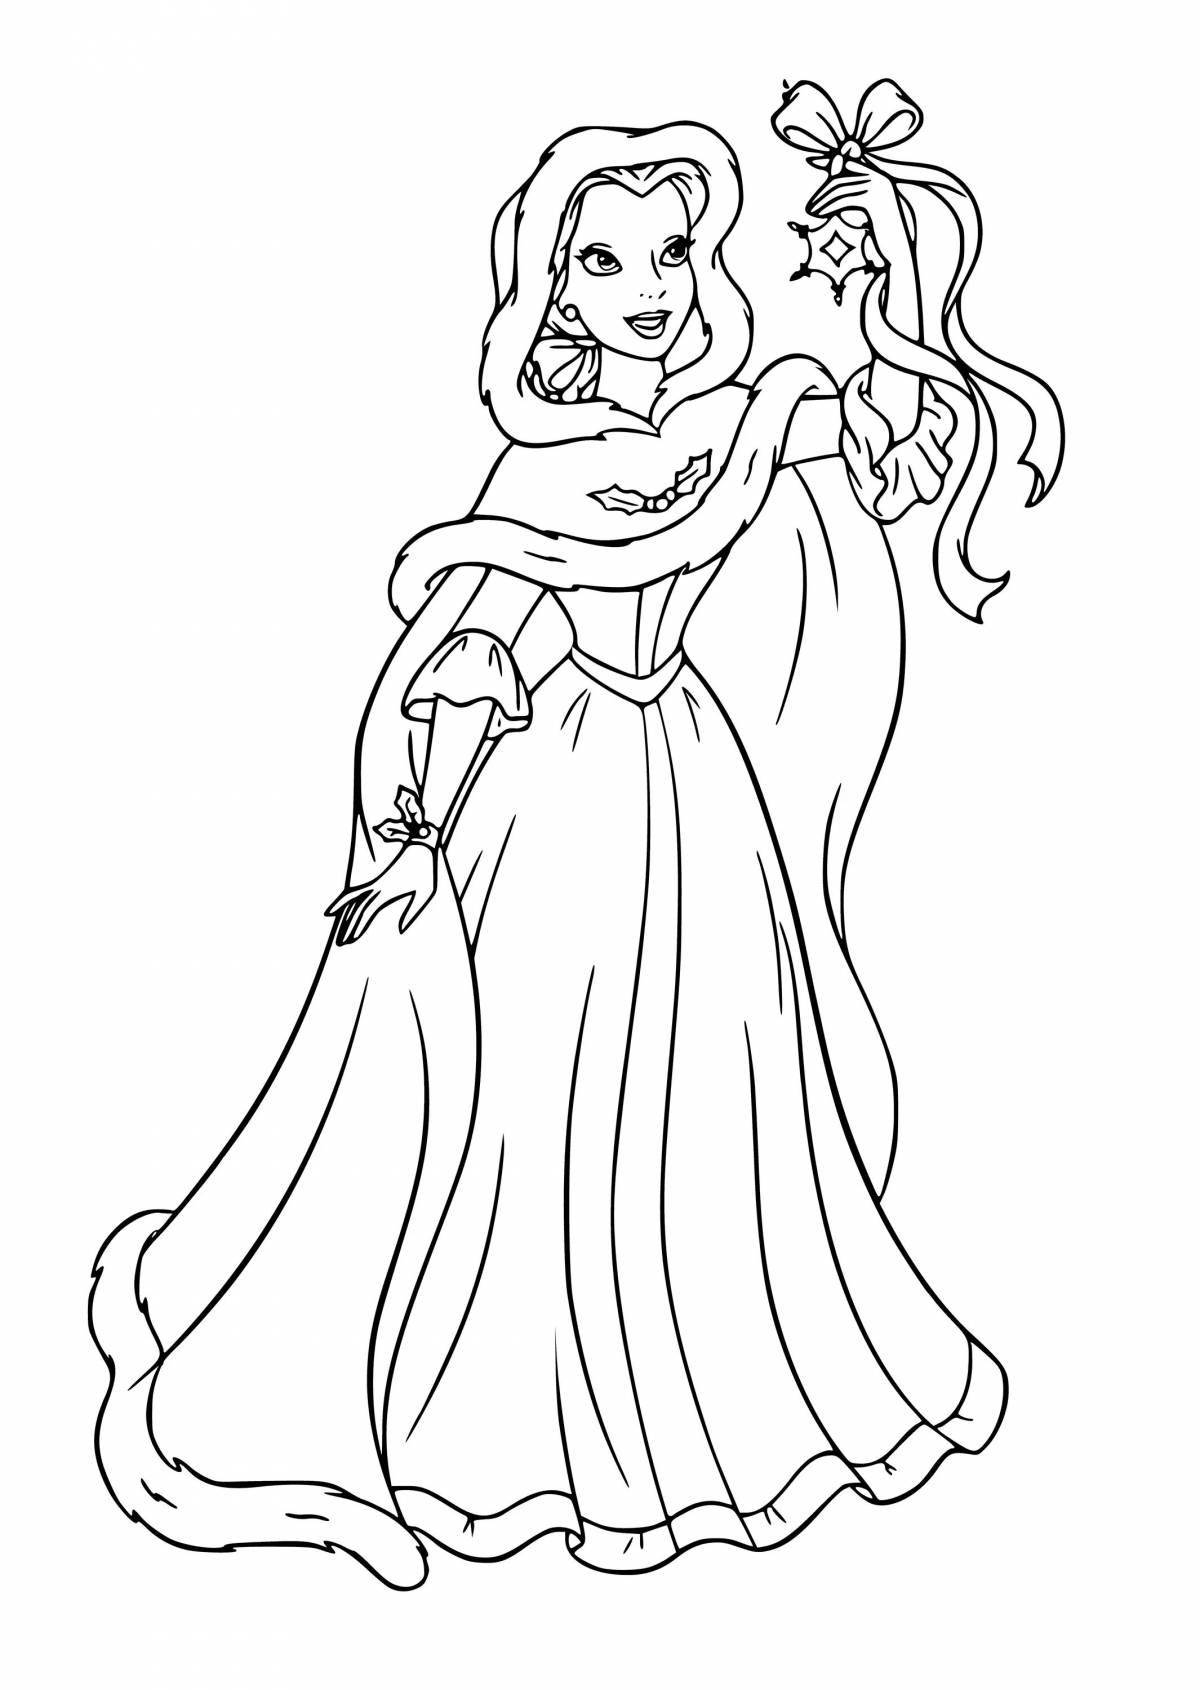 Coloring book of dazzling princess belle